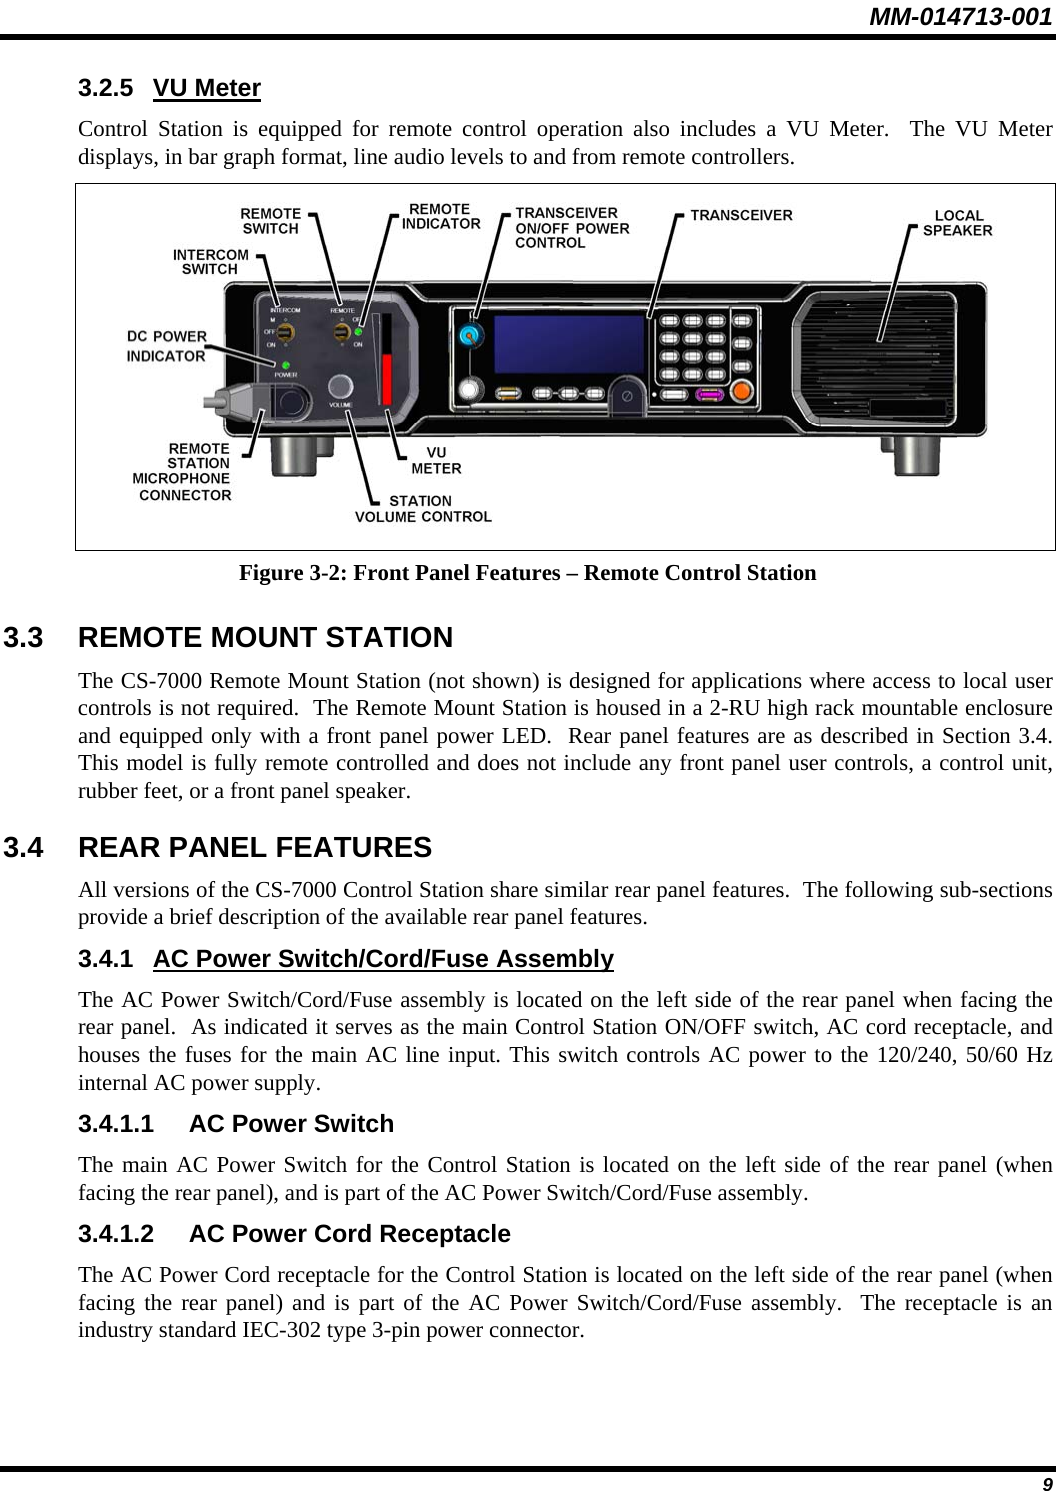 MM-014713-001  9 3.2.5 VU Meter Control Station is equipped for remote control operation also includes a VU Meter.  The VU Meter displays, in bar graph format, line audio levels to and from remote controllers.  Figure 3-2: Front Panel Features – Remote Control Station 3.3 REMOTE MOUNT STATION The CS-7000 Remote Mount Station (not shown) is designed for applications where access to local user controls is not required.  The Remote Mount Station is housed in a 2-RU high rack mountable enclosure and equipped only with a front panel power LED.  Rear panel features are as described in Section 3.4.  This model is fully remote controlled and does not include any front panel user controls, a control unit, rubber feet, or a front panel speaker. 3.4 REAR PANEL FEATURES All versions of the CS-7000 Control Station share similar rear panel features.  The following sub-sections provide a brief description of the available rear panel features. 3.4.1  AC Power Switch/Cord/Fuse Assembly The AC Power Switch/Cord/Fuse assembly is located on the left side of the rear panel when facing the rear panel.  As indicated it serves as the main Control Station ON/OFF switch, AC cord receptacle, and houses the fuses for the main AC line input. This switch controls AC power to the 120/240, 50/60 Hz internal AC power supply. 3.4.1.1 AC Power Switch The main AC Power Switch for the Control Station is located on the left side of the rear panel (when facing the rear panel), and is part of the AC Power Switch/Cord/Fuse assembly. 3.4.1.2 AC Power Cord Receptacle The AC Power Cord receptacle for the Control Station is located on the left side of the rear panel (when facing the rear panel) and is part of the AC Power Switch/Cord/Fuse assembly.  The receptacle is an industry standard IEC-302 type 3-pin power connector. 